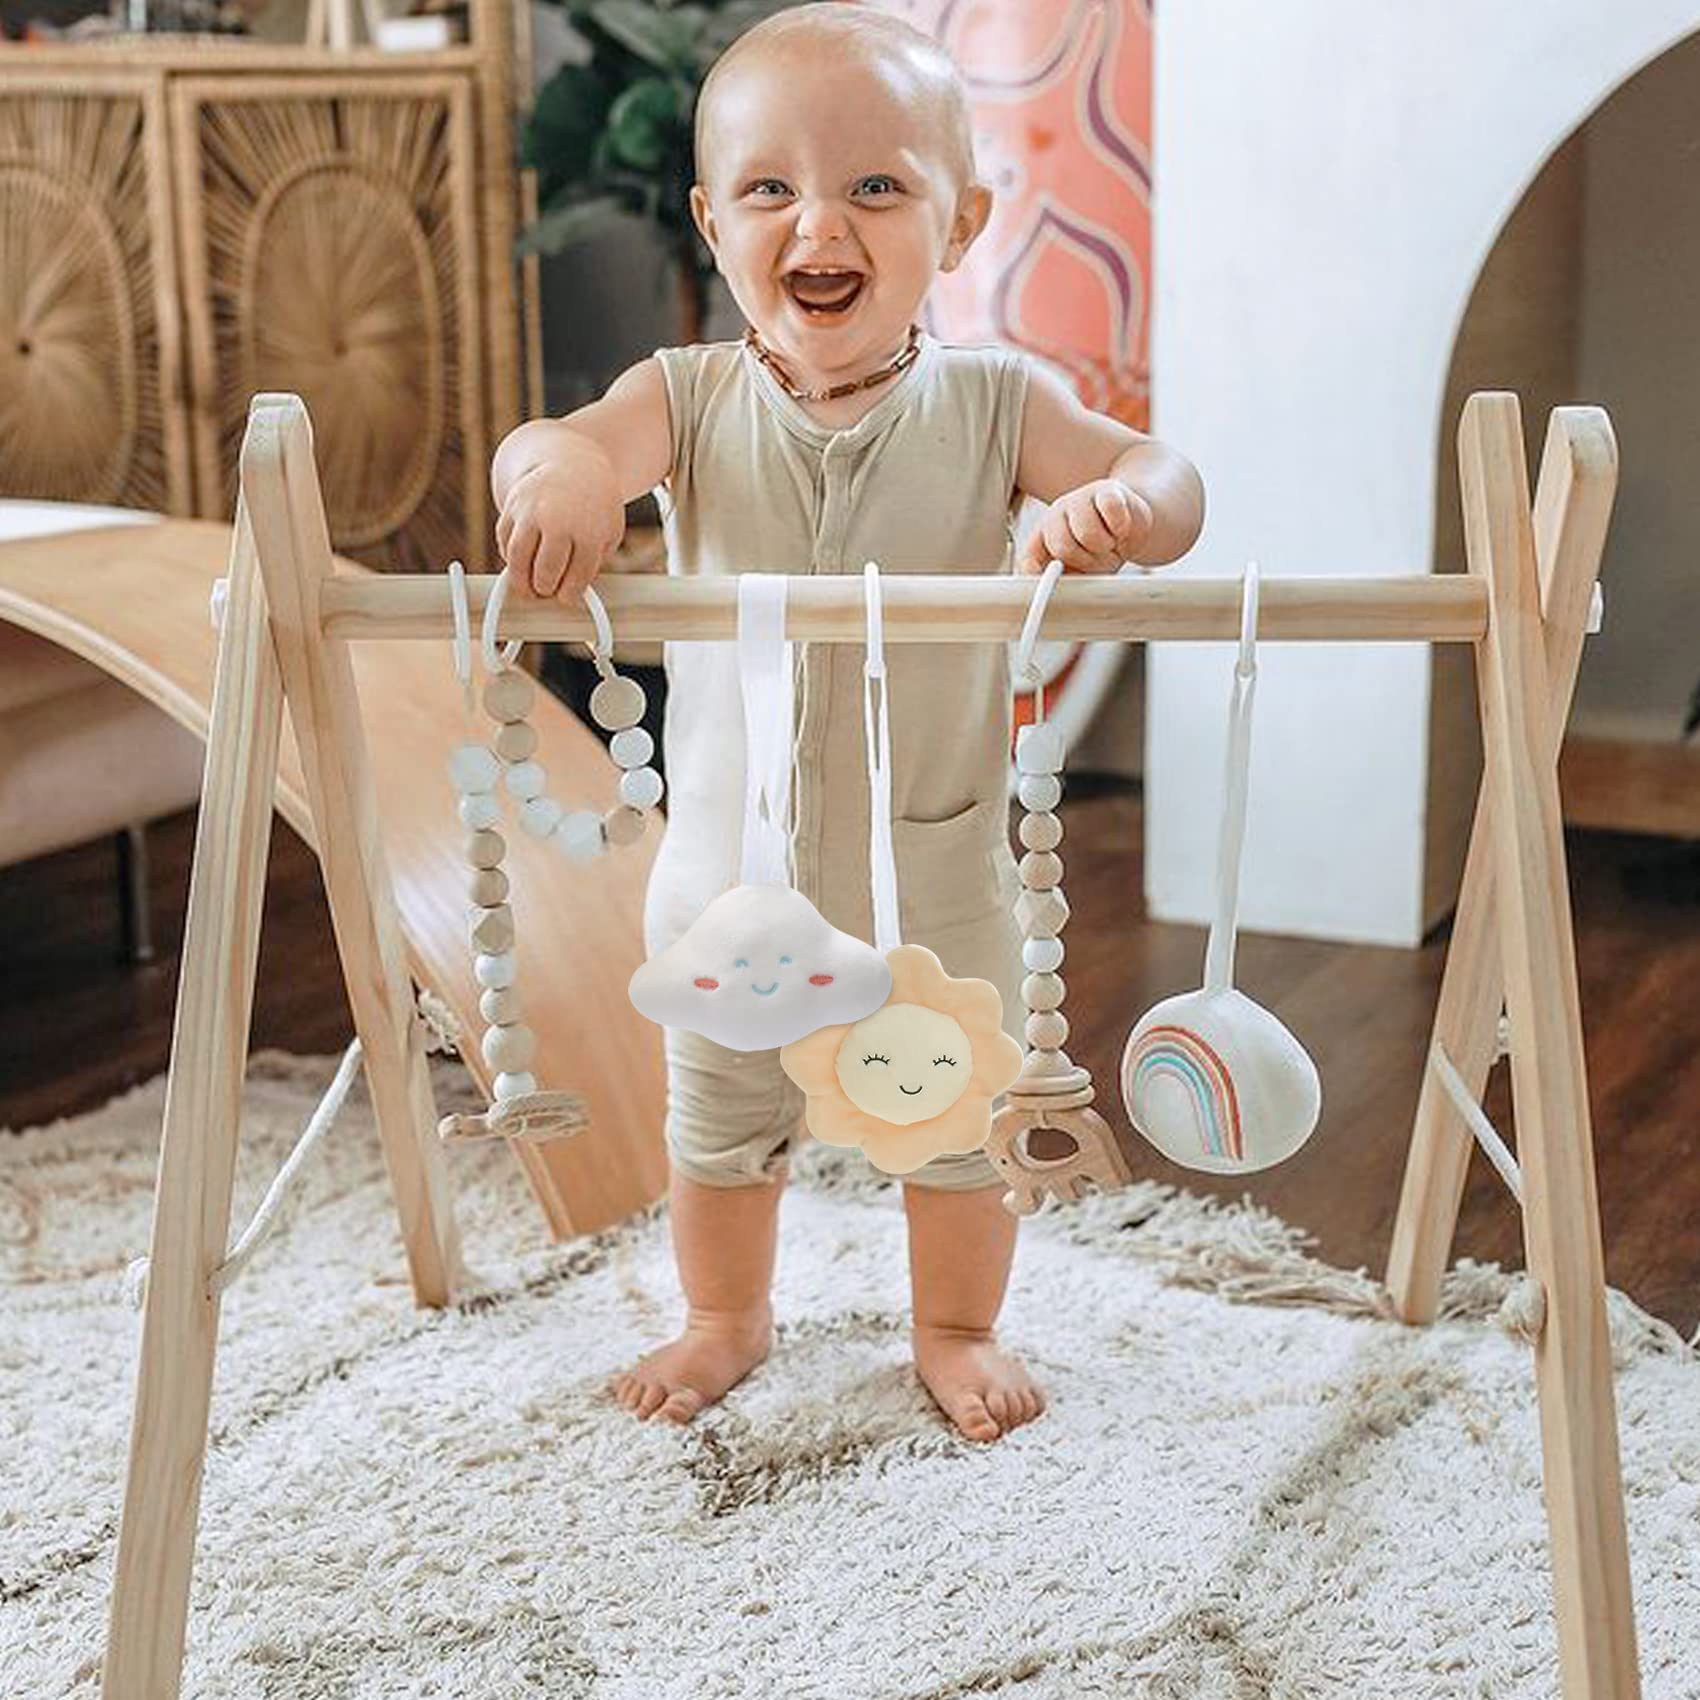 Wooden Baby Gym with 6 Wooden Baby Toys Foldable Baby Play Gym Frame Activity Gym Hanging Bar Newborn Gift Baby Girl and Boy Gym